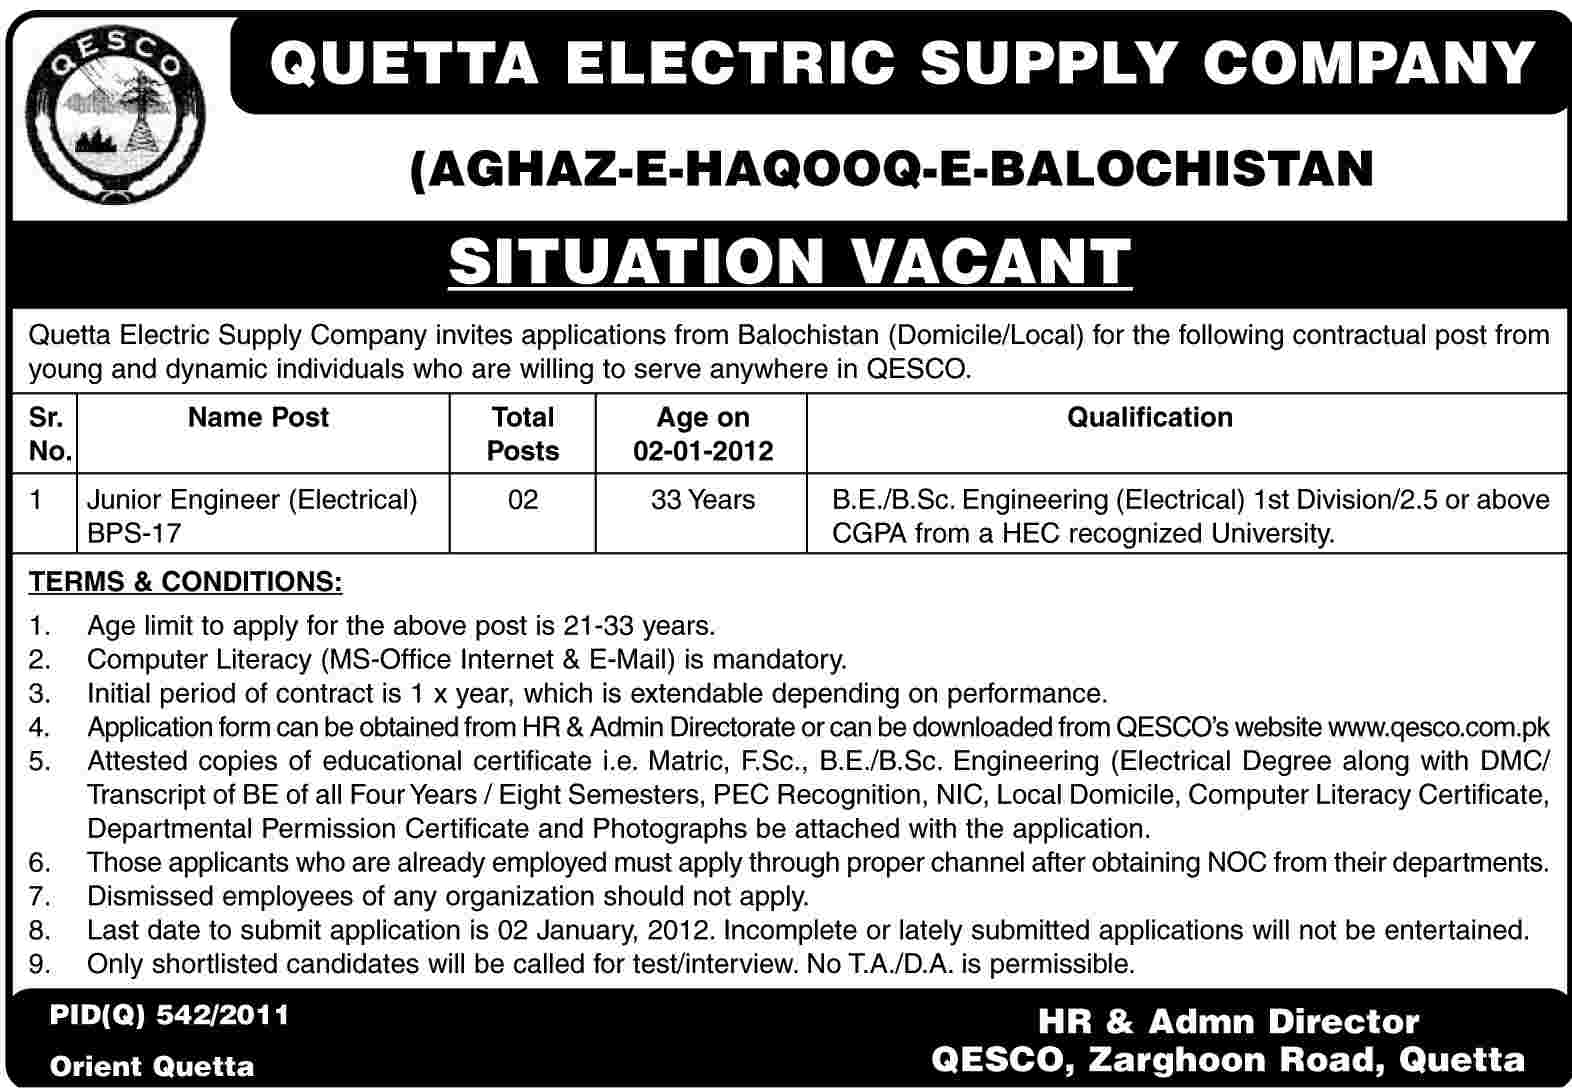 Quetta Electric Supply Company Required the Services of Junior Engineers (Electrical)